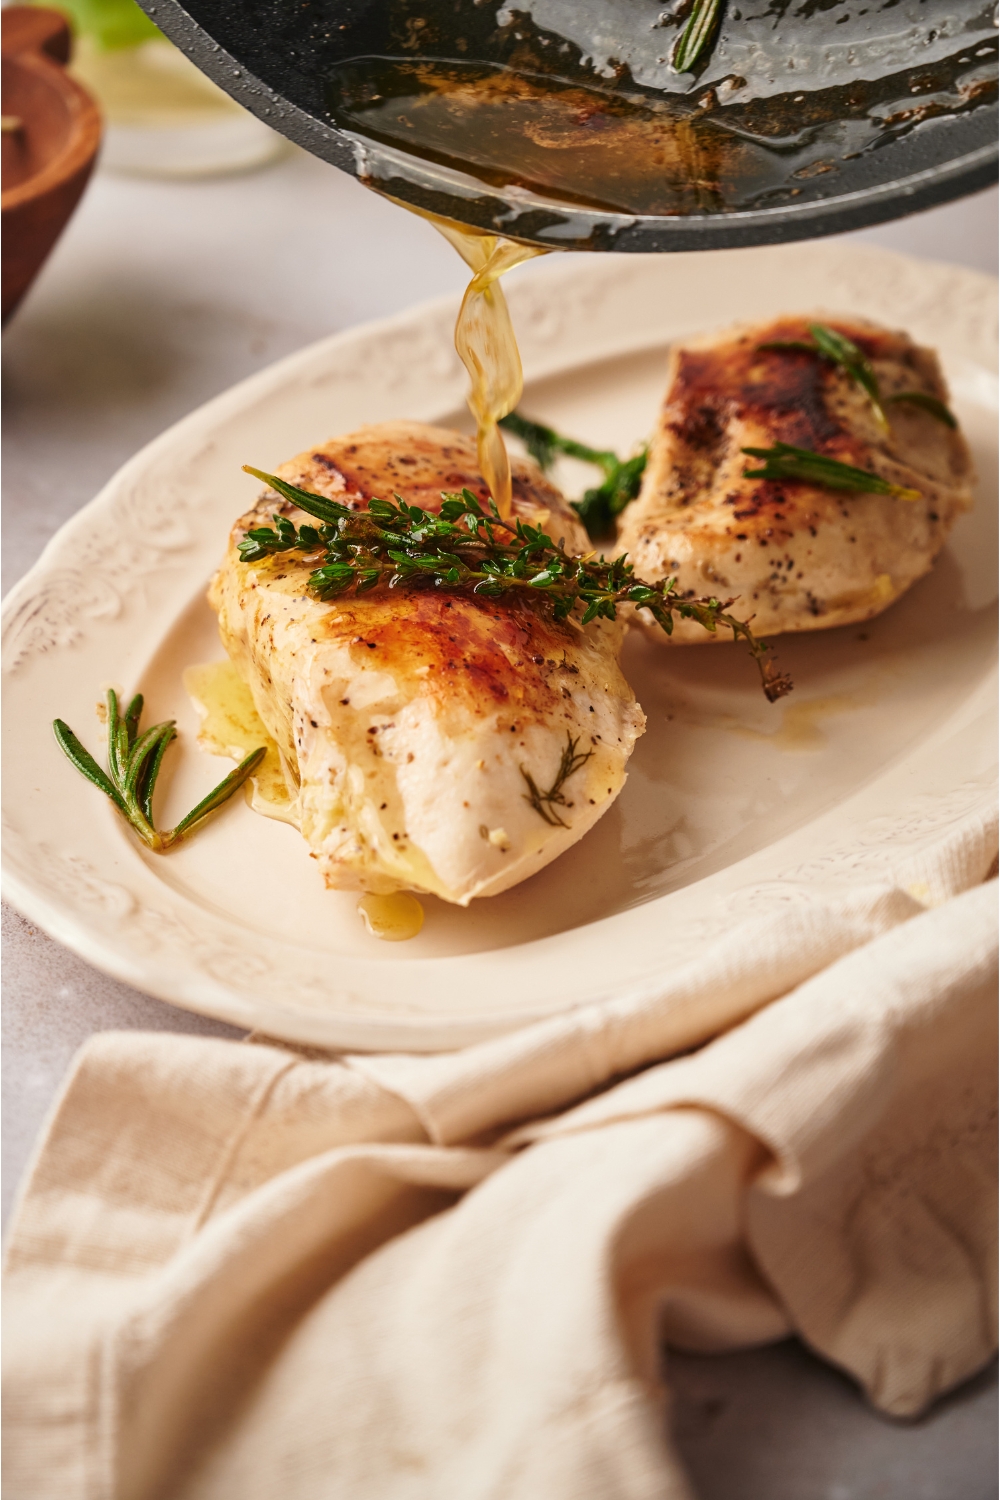 Two cooked chicken breasts topped with fresh herbs and a skillet pouring a butter sauce overtop of one of the chicken breasts.